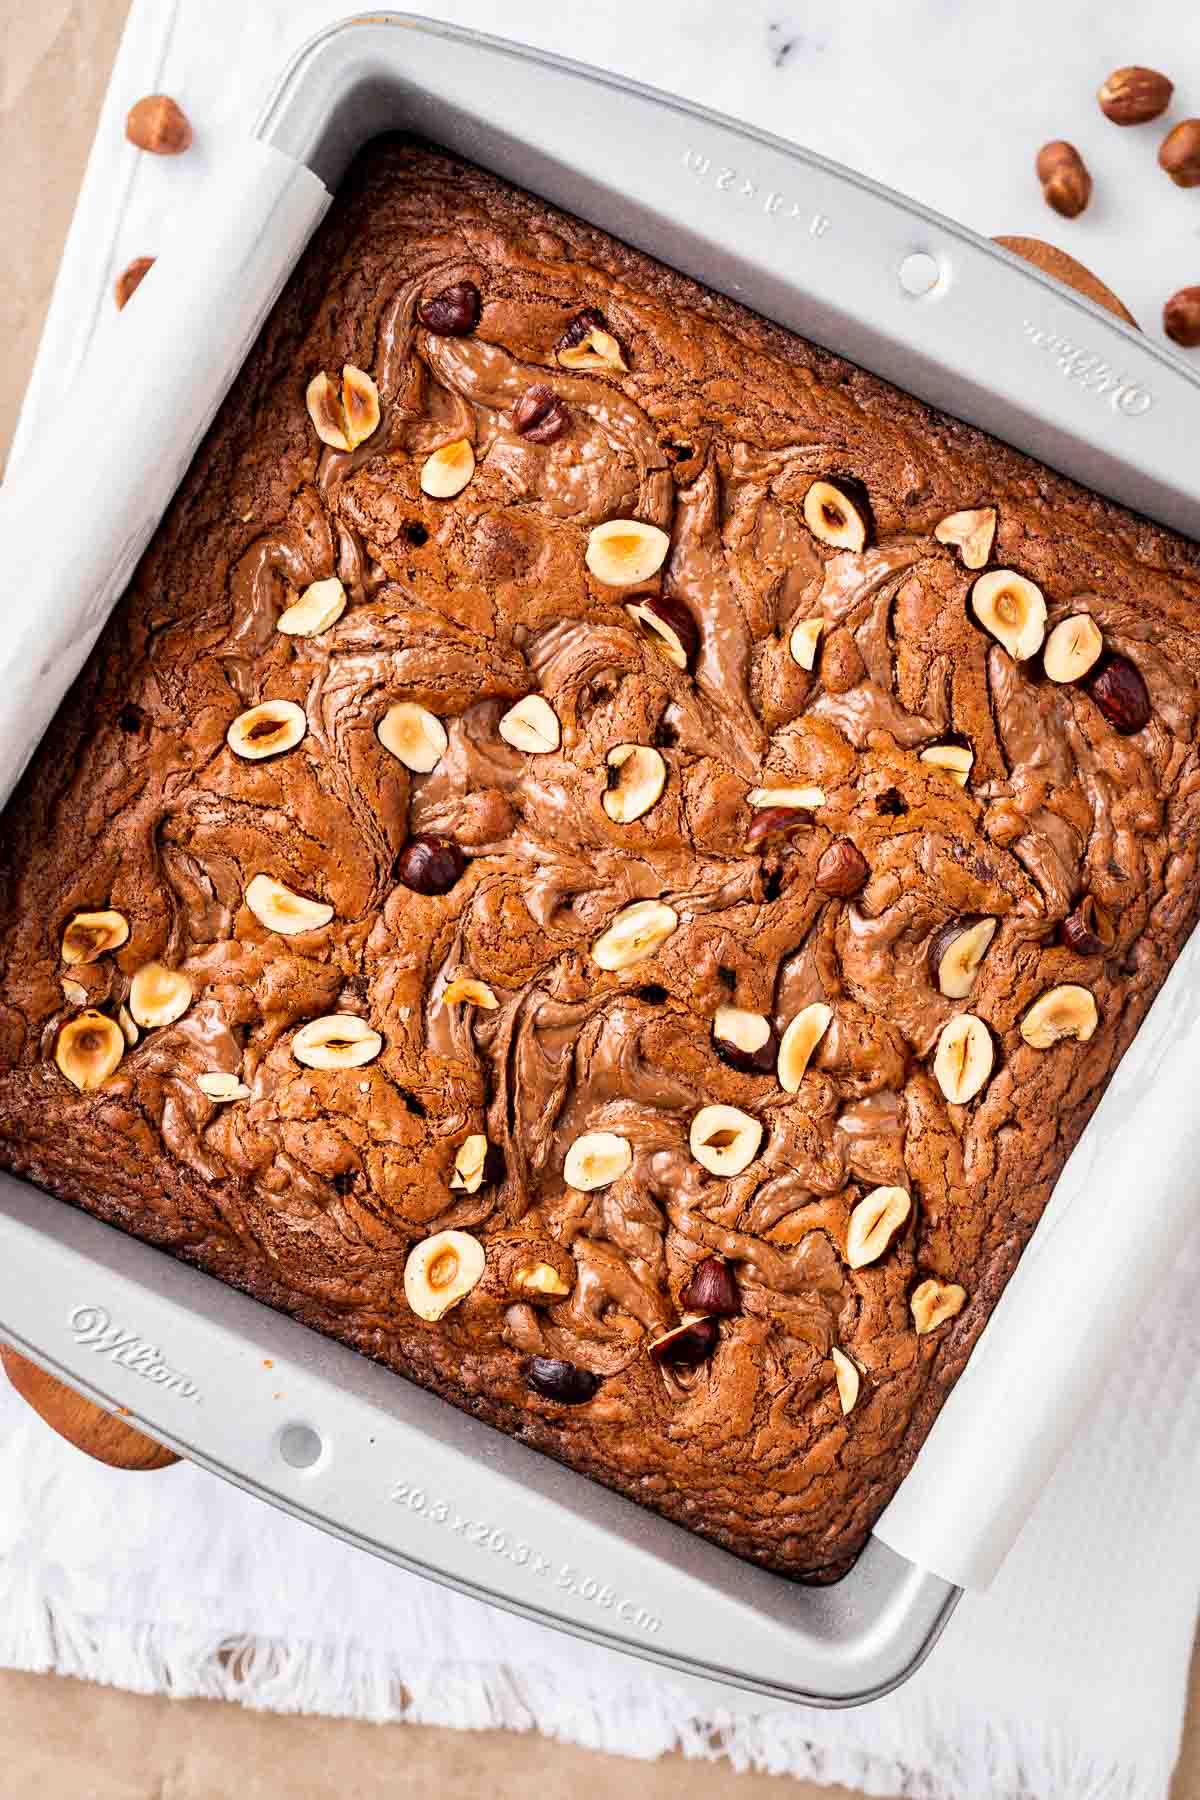 A baking pan full of brownies sprinkled with hazelnuts.